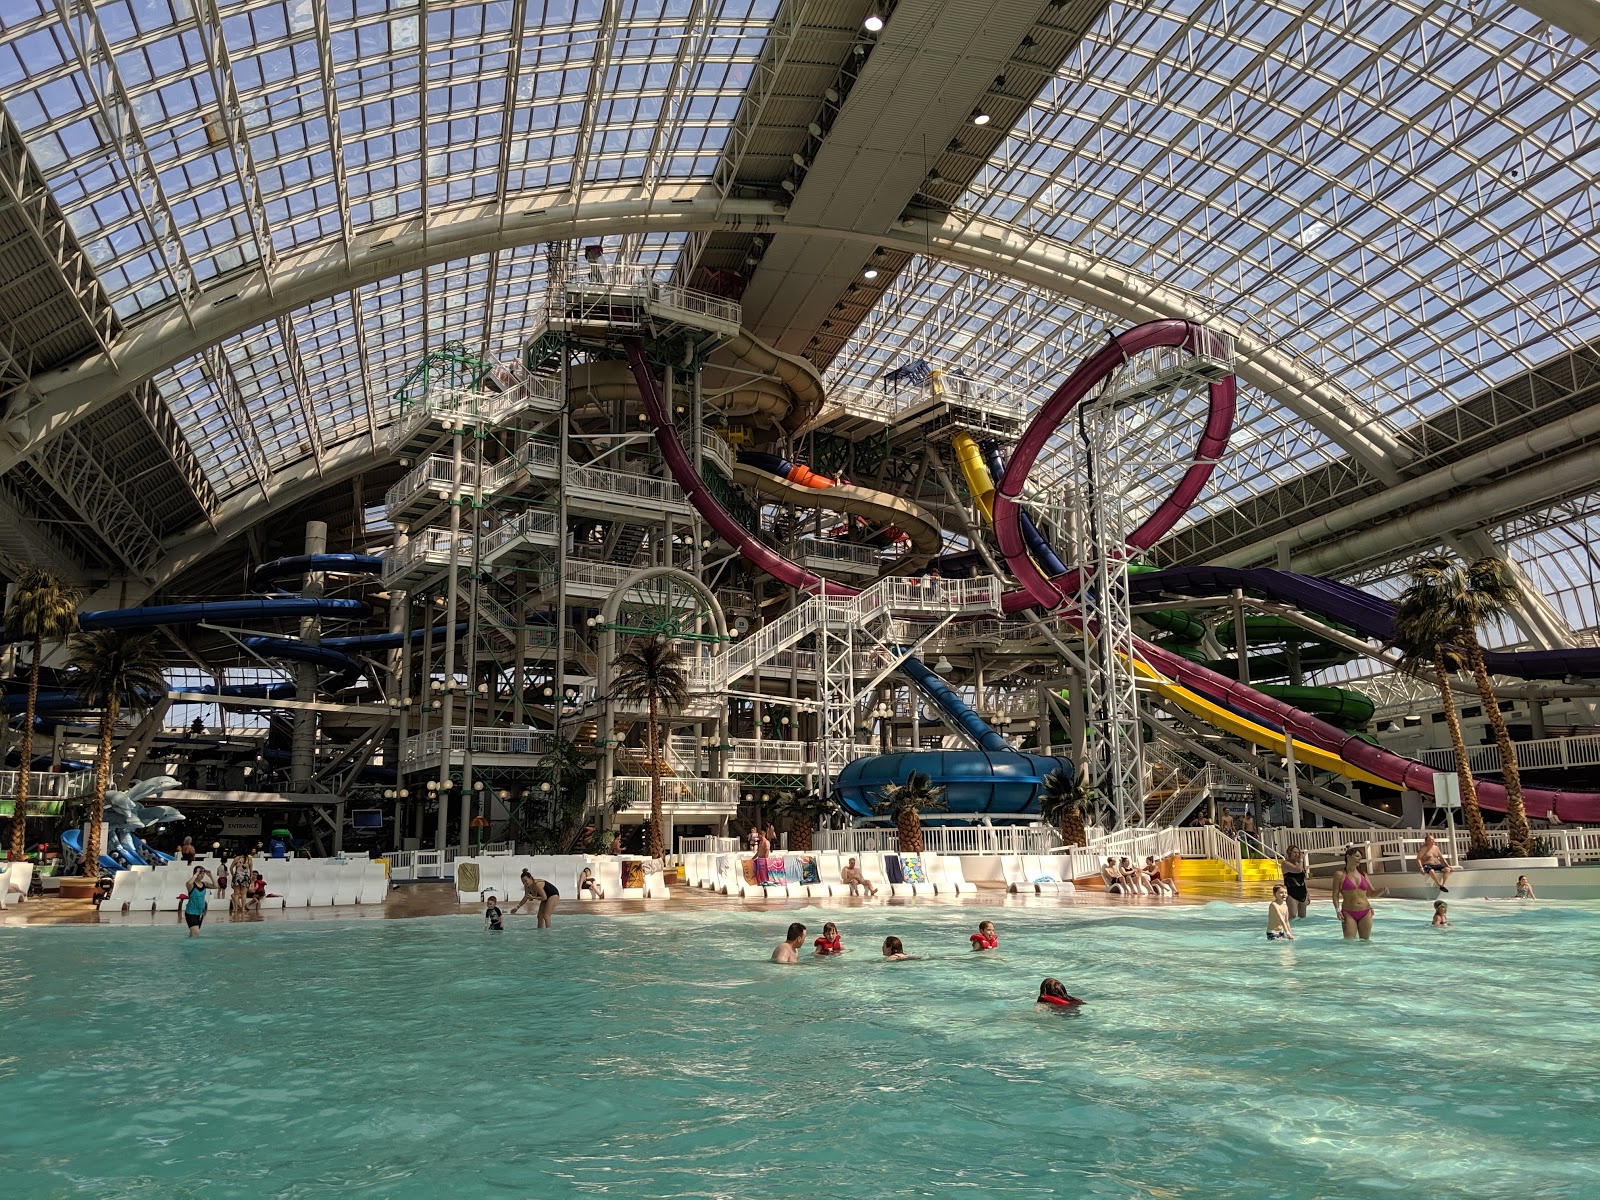 West Edmonton Mall In Alberta Has An Indoor Water Park With The Worlds ...